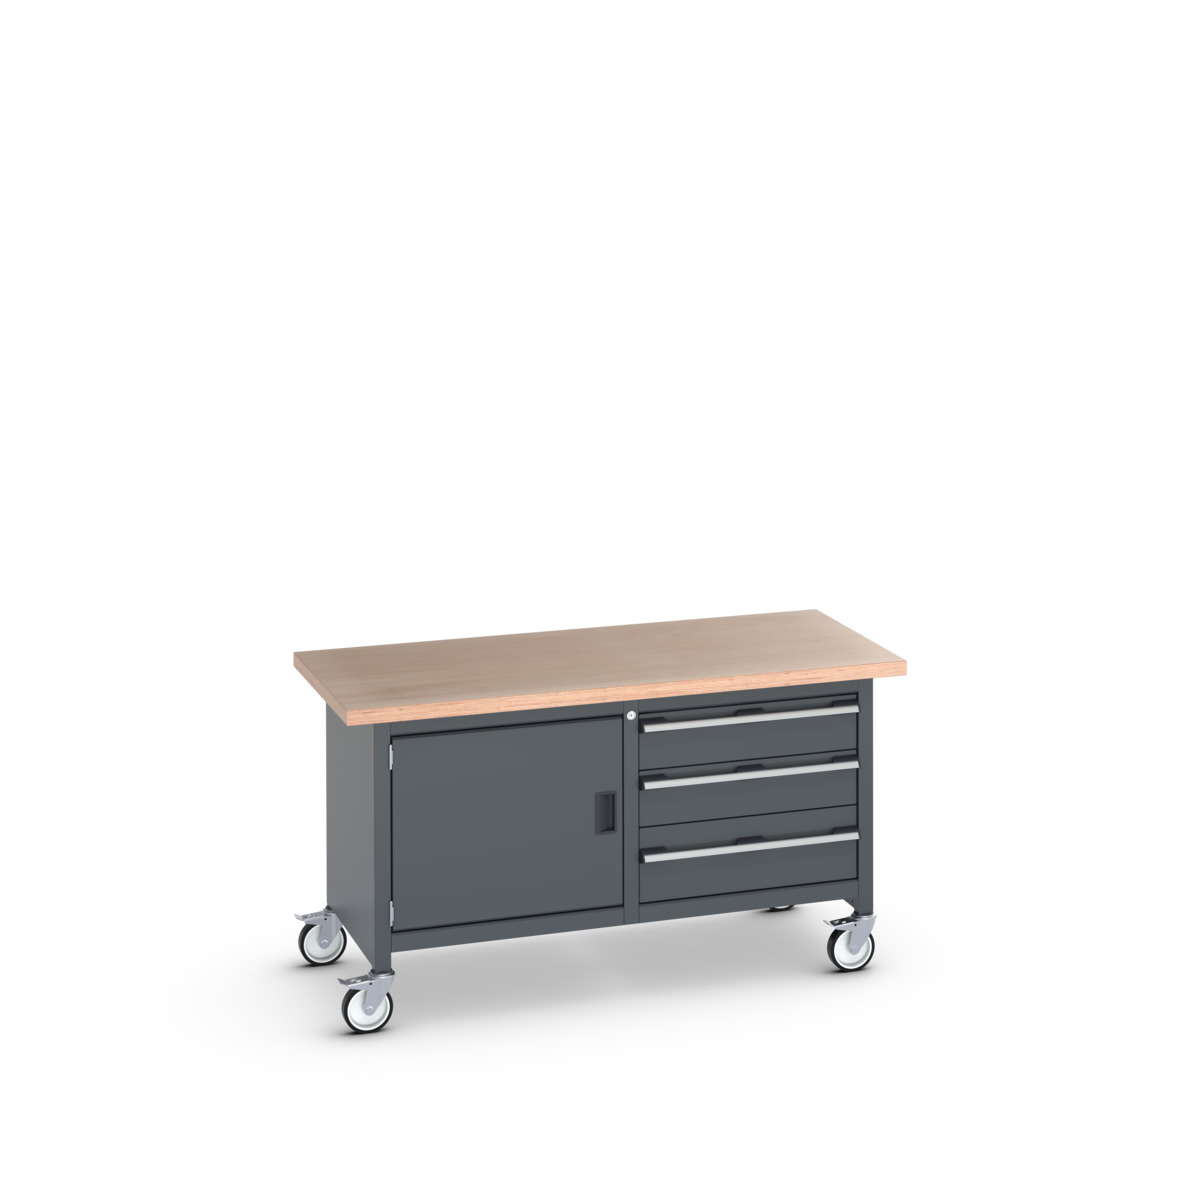 41002100.77V - cubio mobile storage bench (mpx)